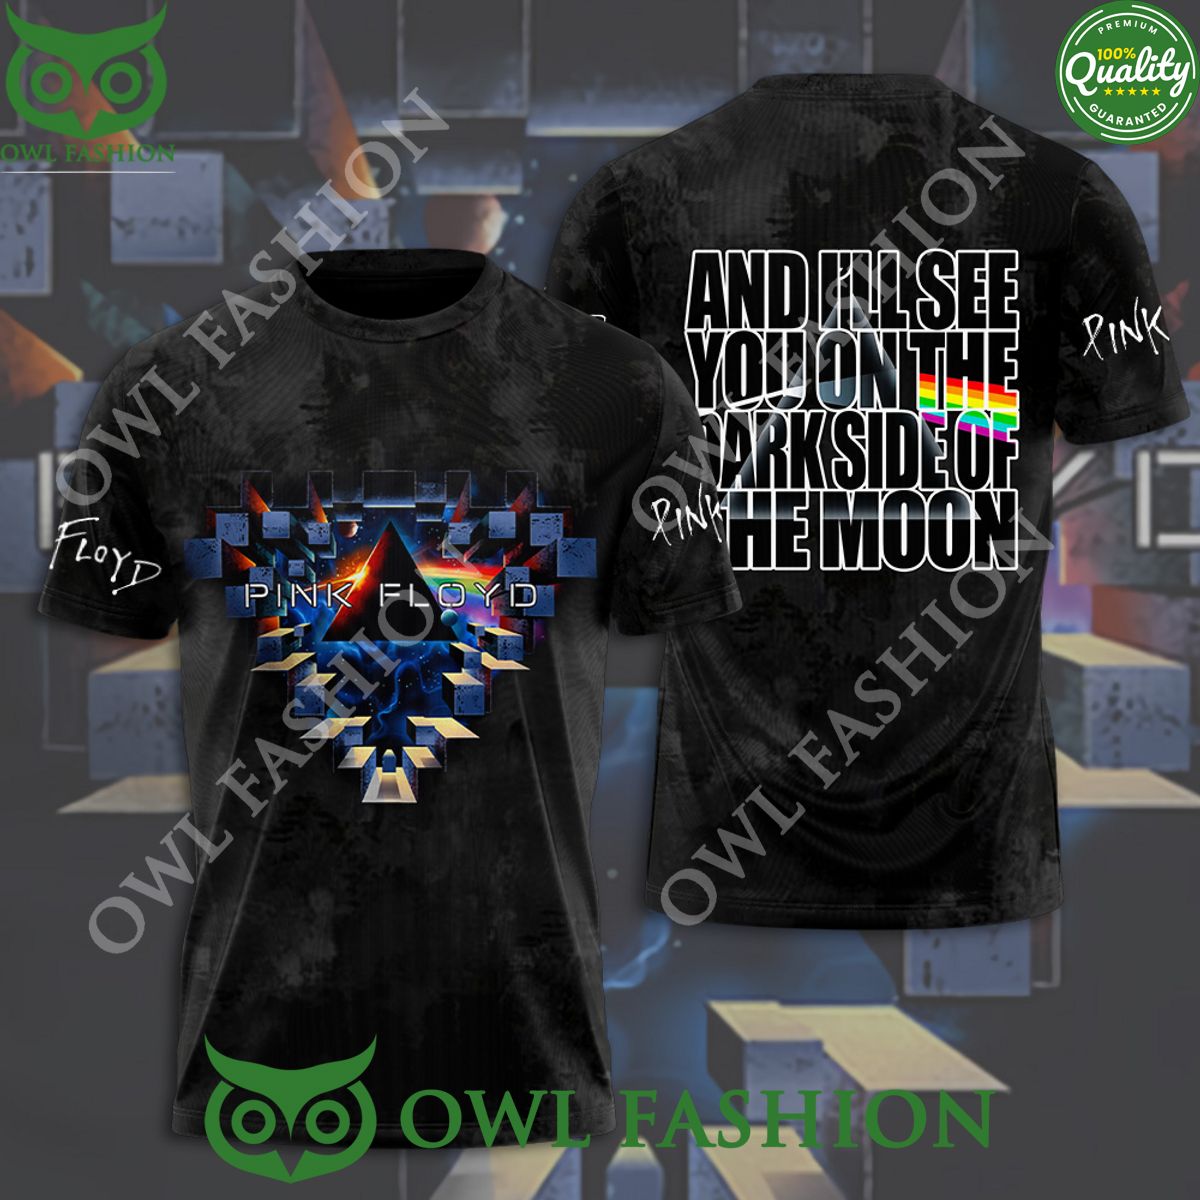 pink floyd and ill see you on the dark side of the moon 3d shirt 1 PYzJX.jpg